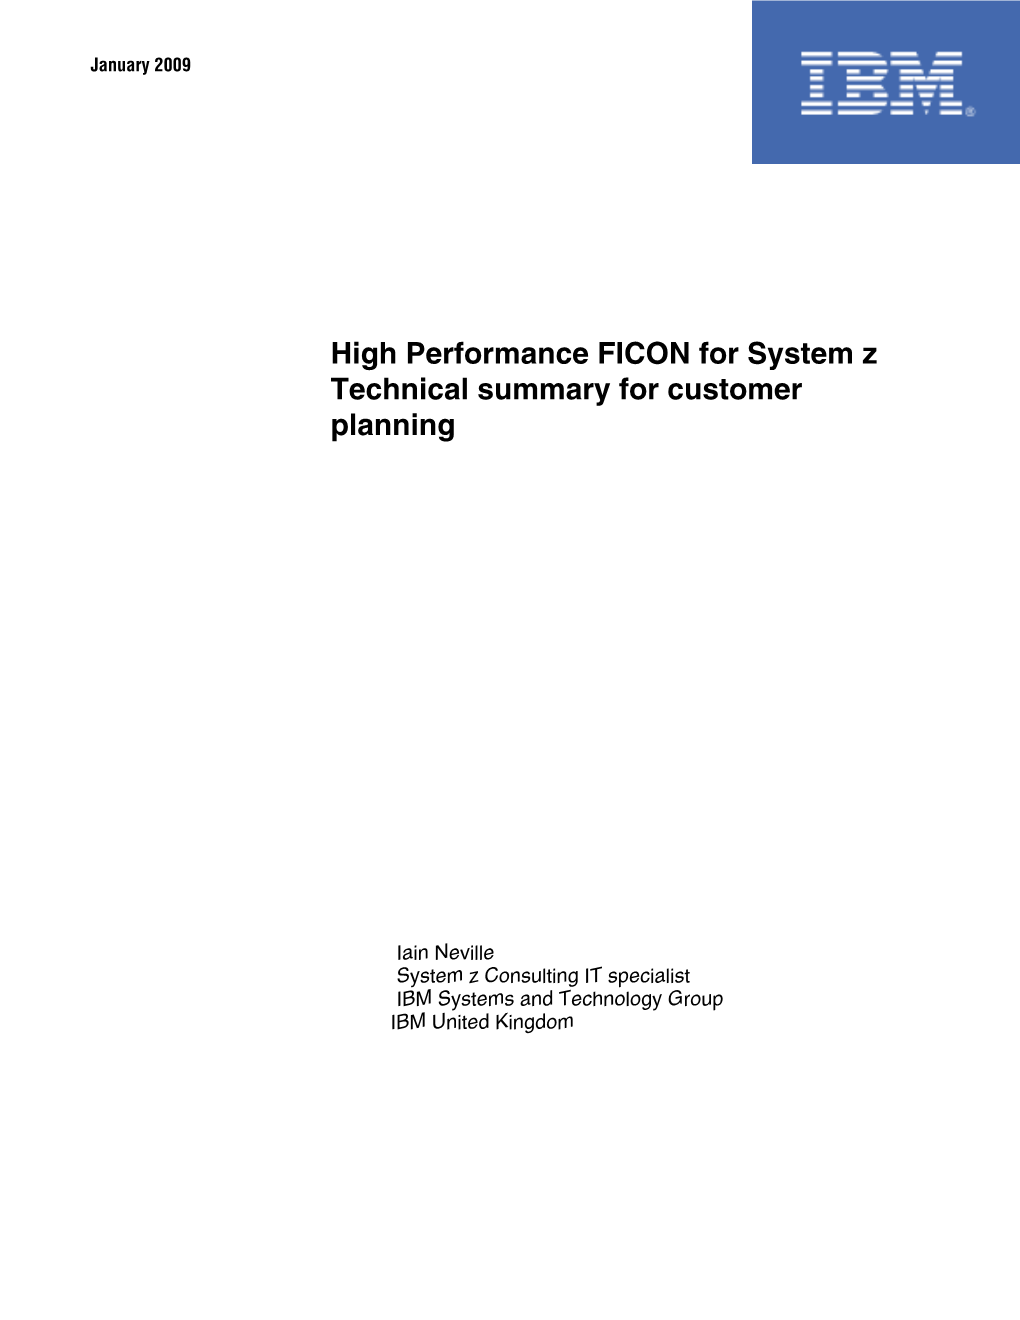 High Performance FICON for System Z Technical Summary for Customer Planning